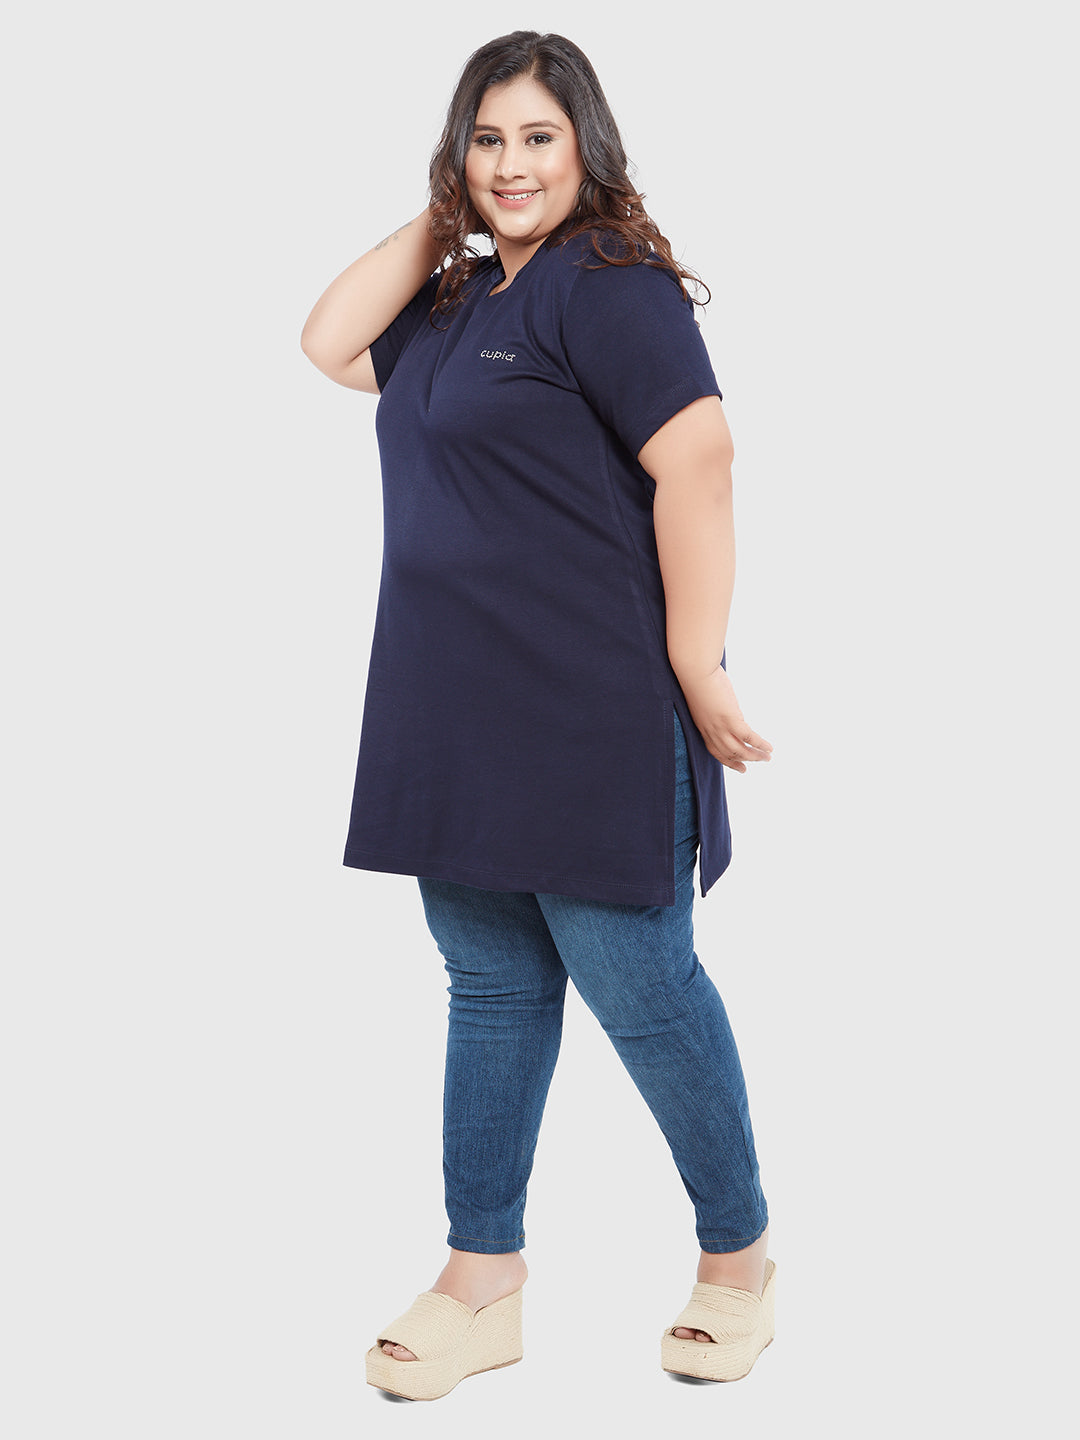 Comfortable Plus Size Half Long Top For Women In Navy Blue